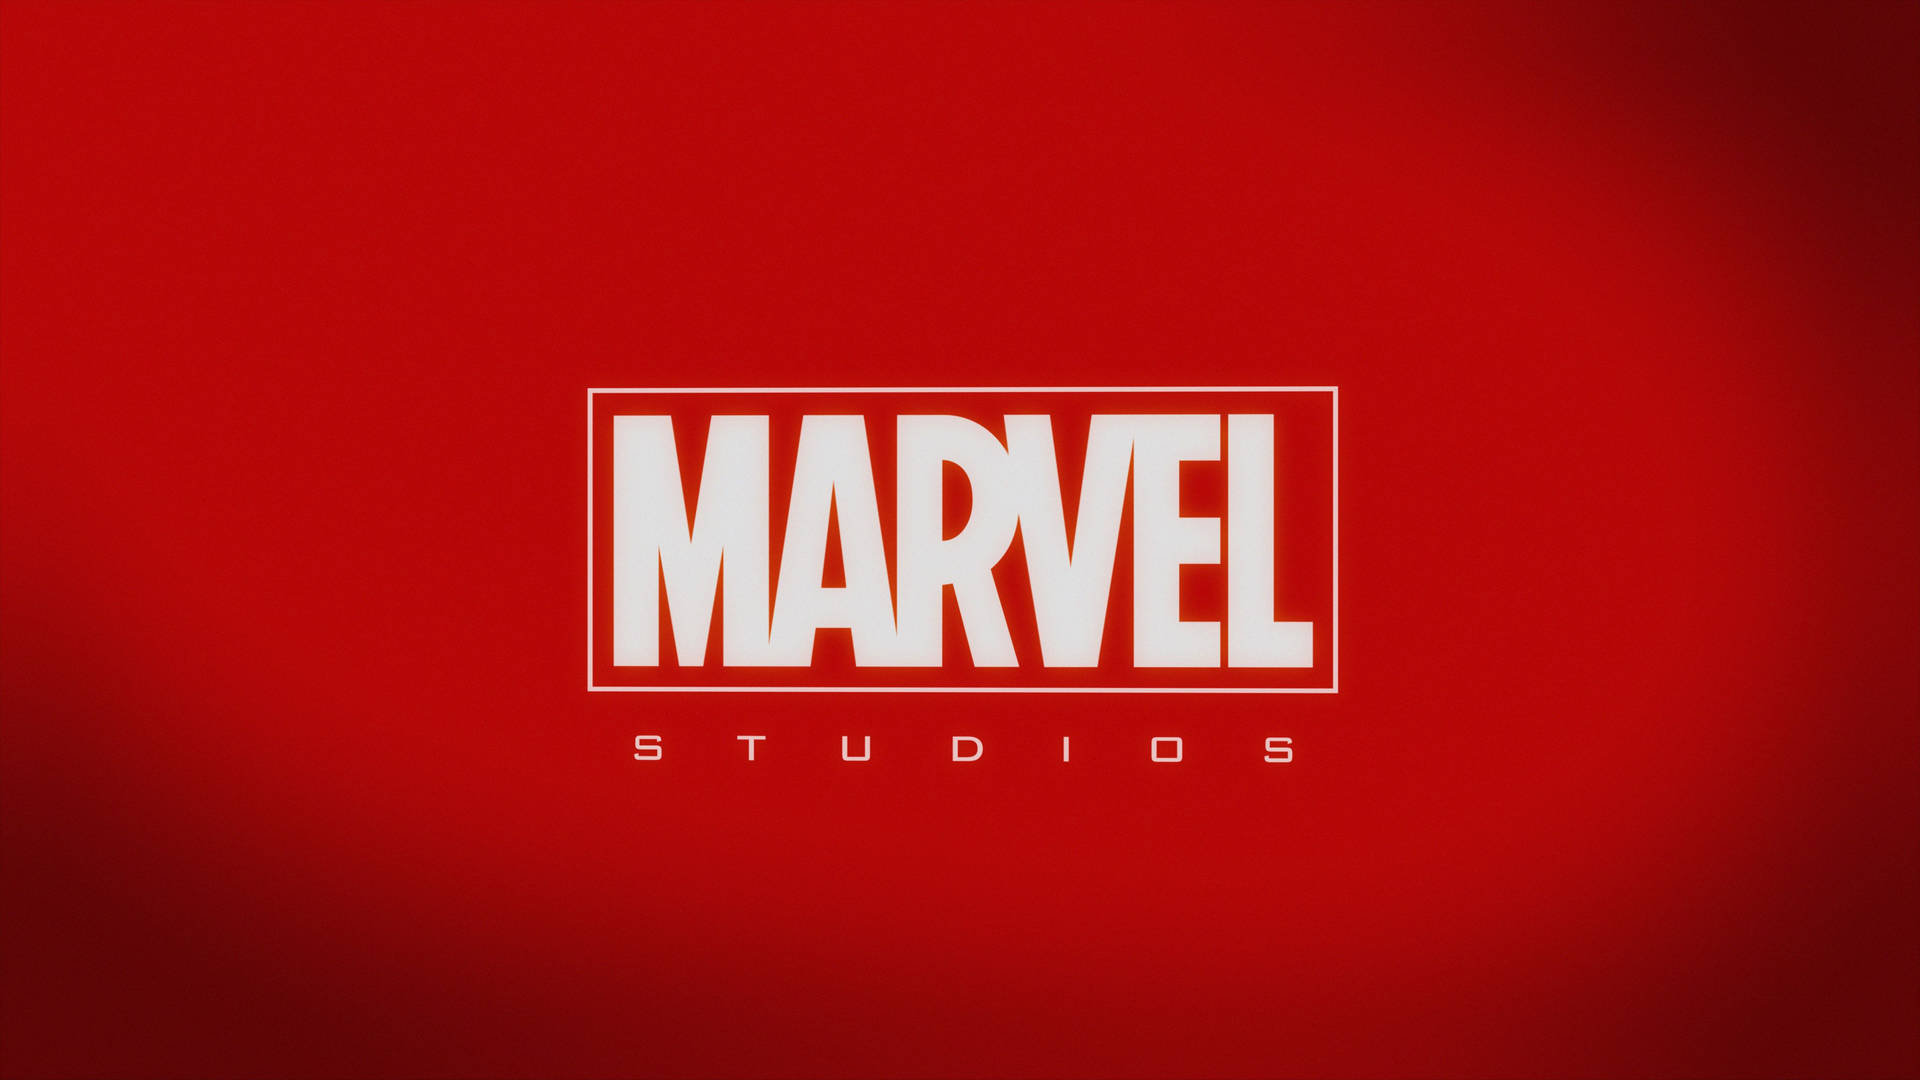 Marvel Studios font title and color in pure red background.